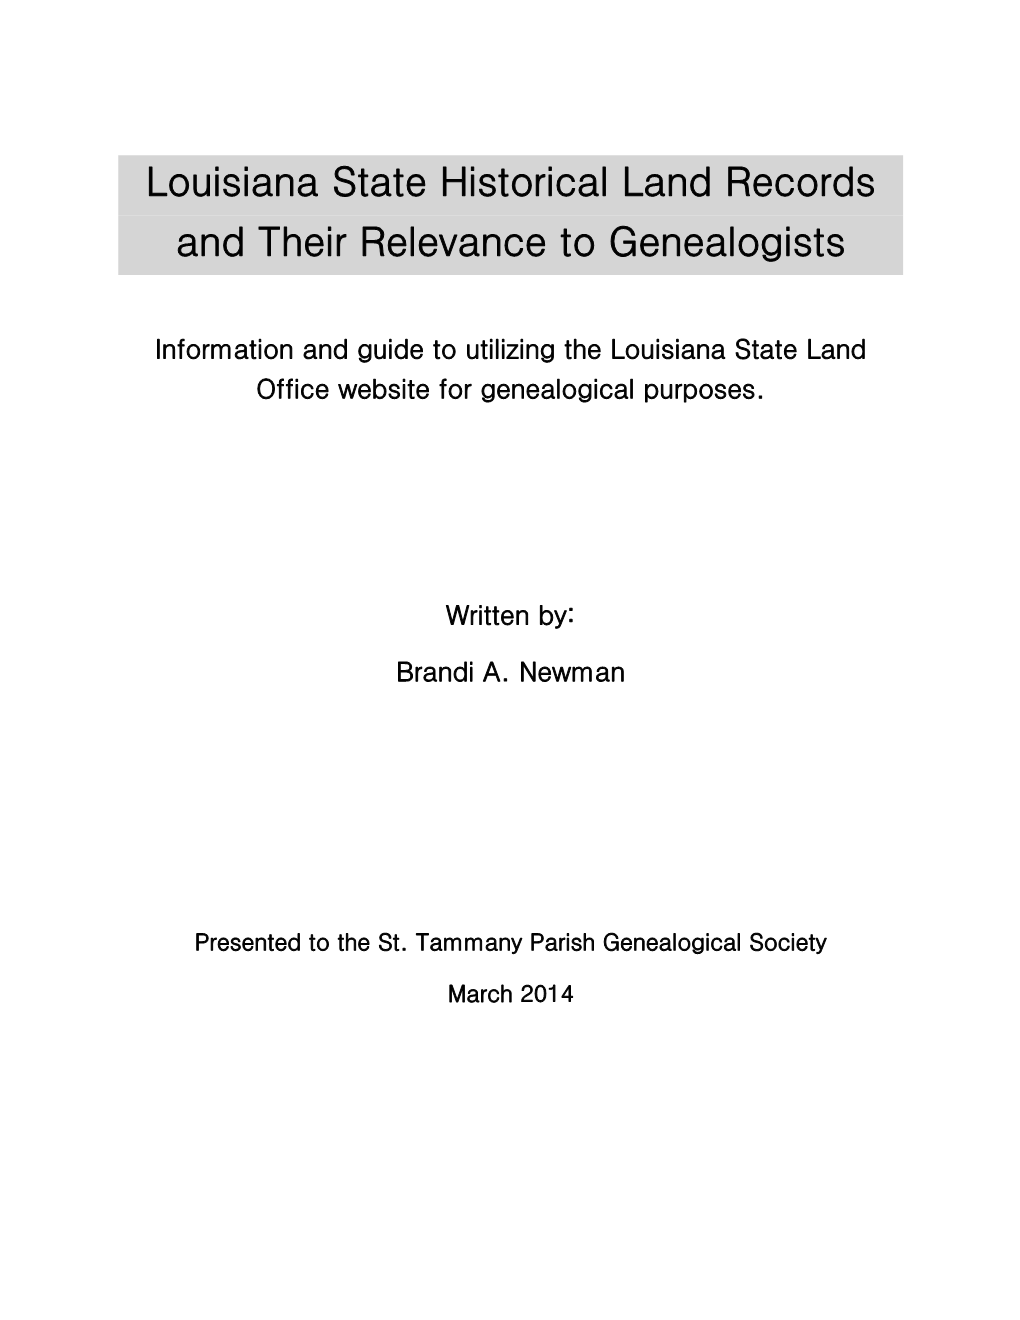 Louisiana State Historical Land Records and Their Relevance to Genealogists